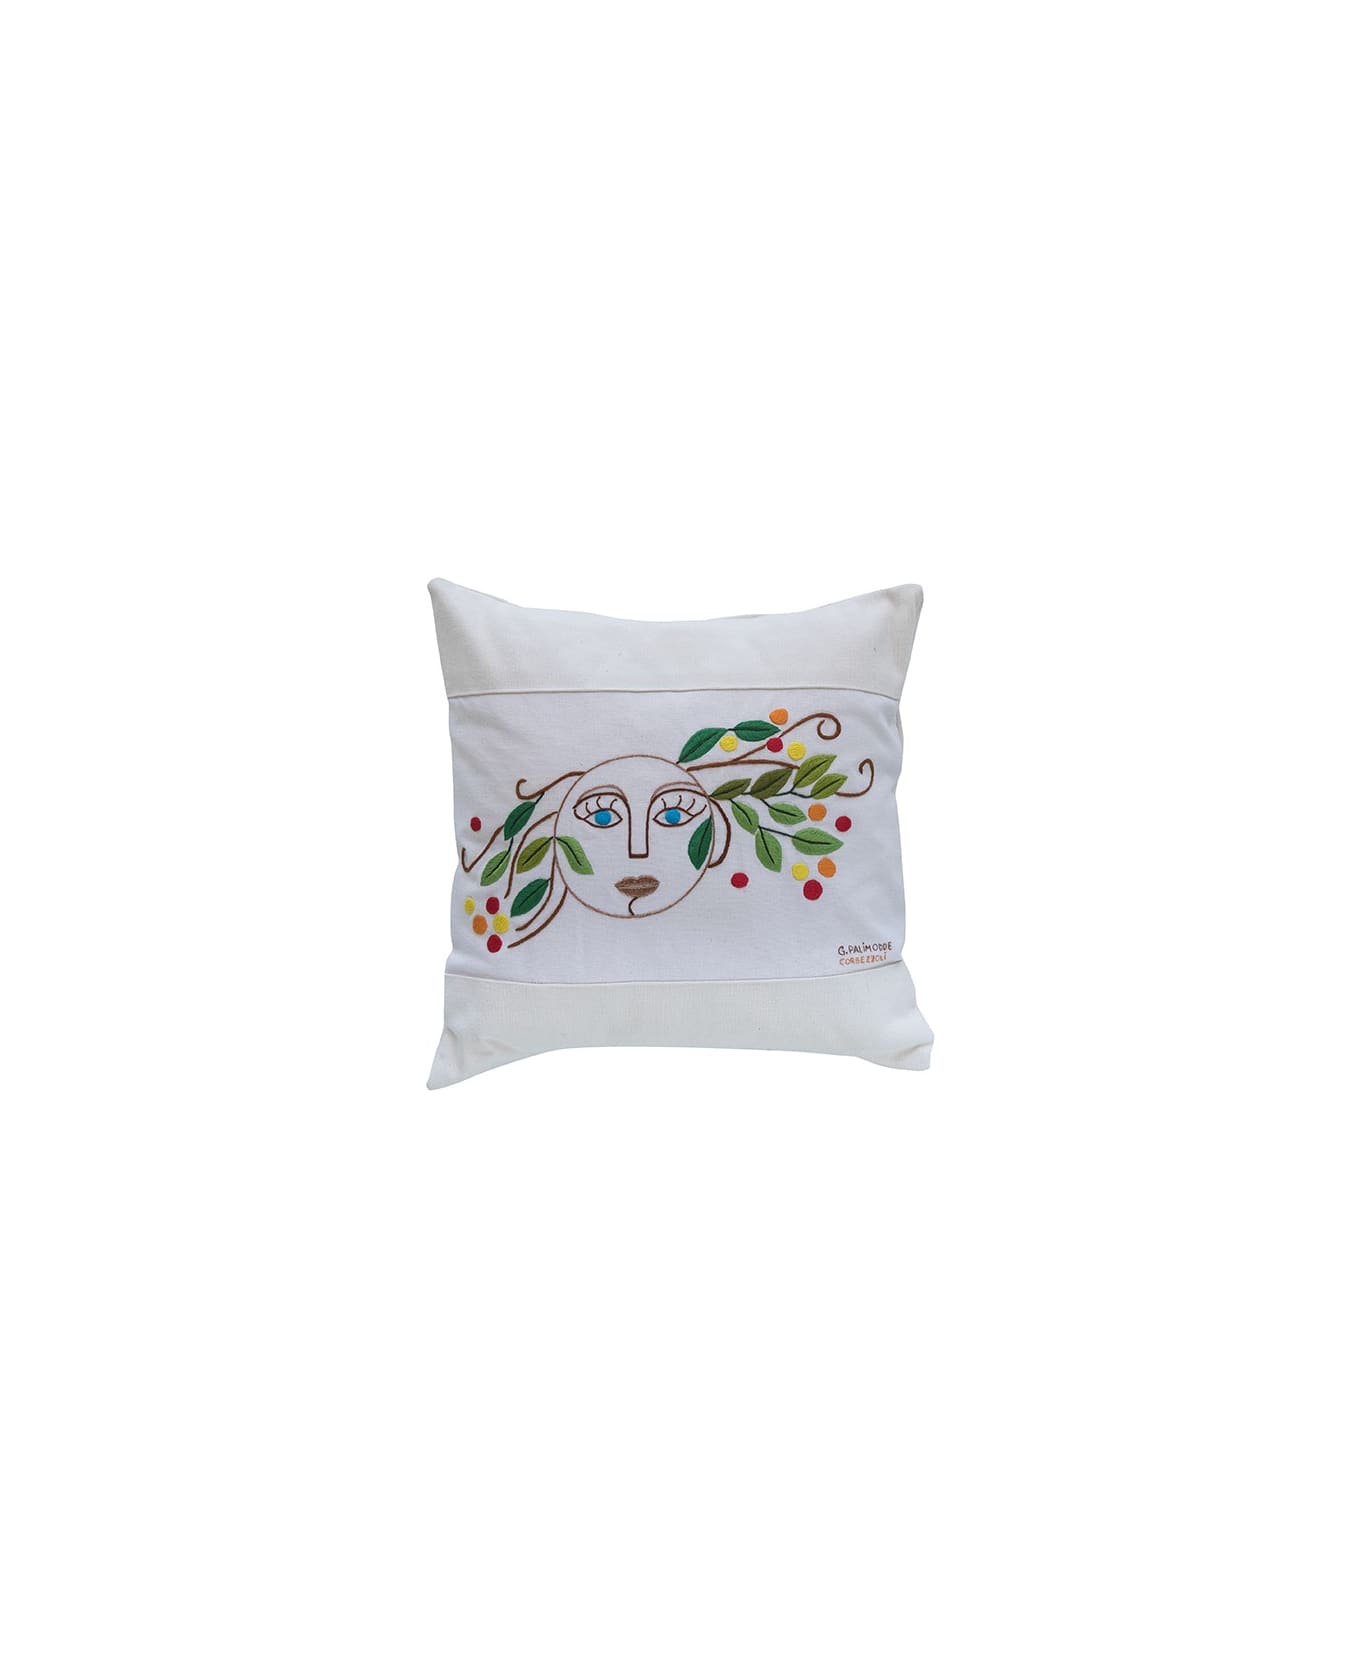 Le Botteghe su Gologone Cushions Embroidered 50x50 Cm - White クッション